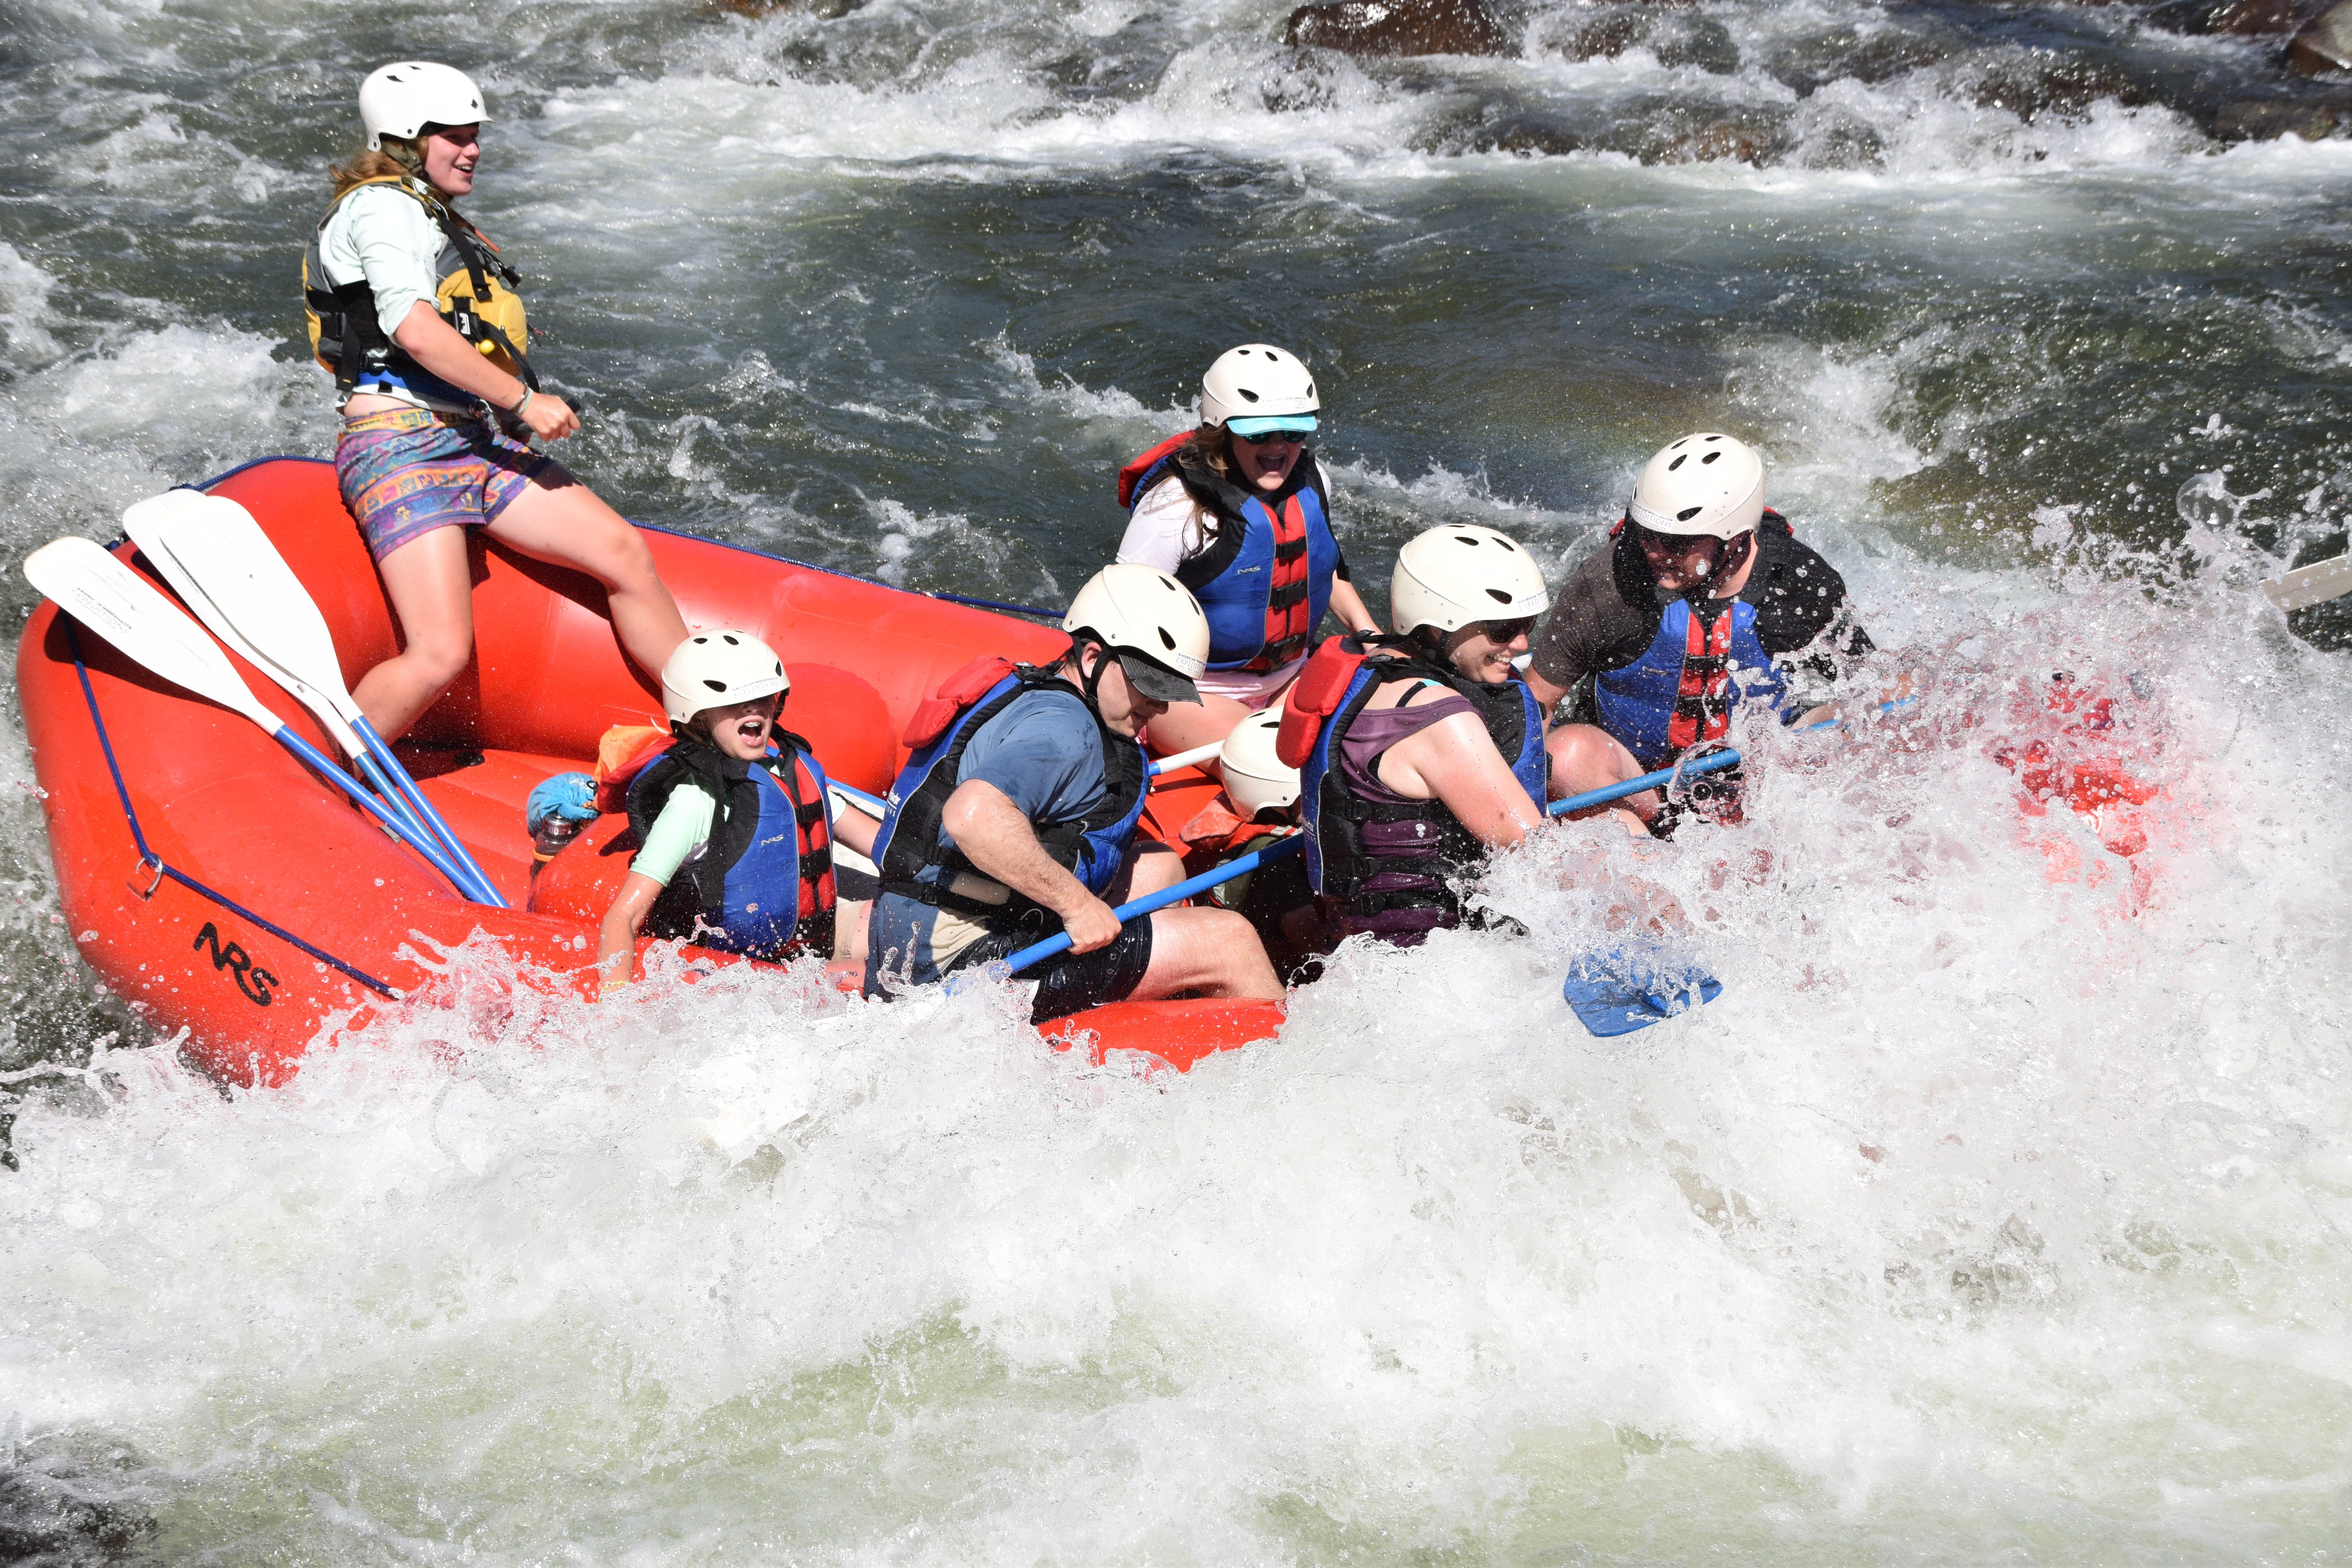 whitewater rafting on the American River